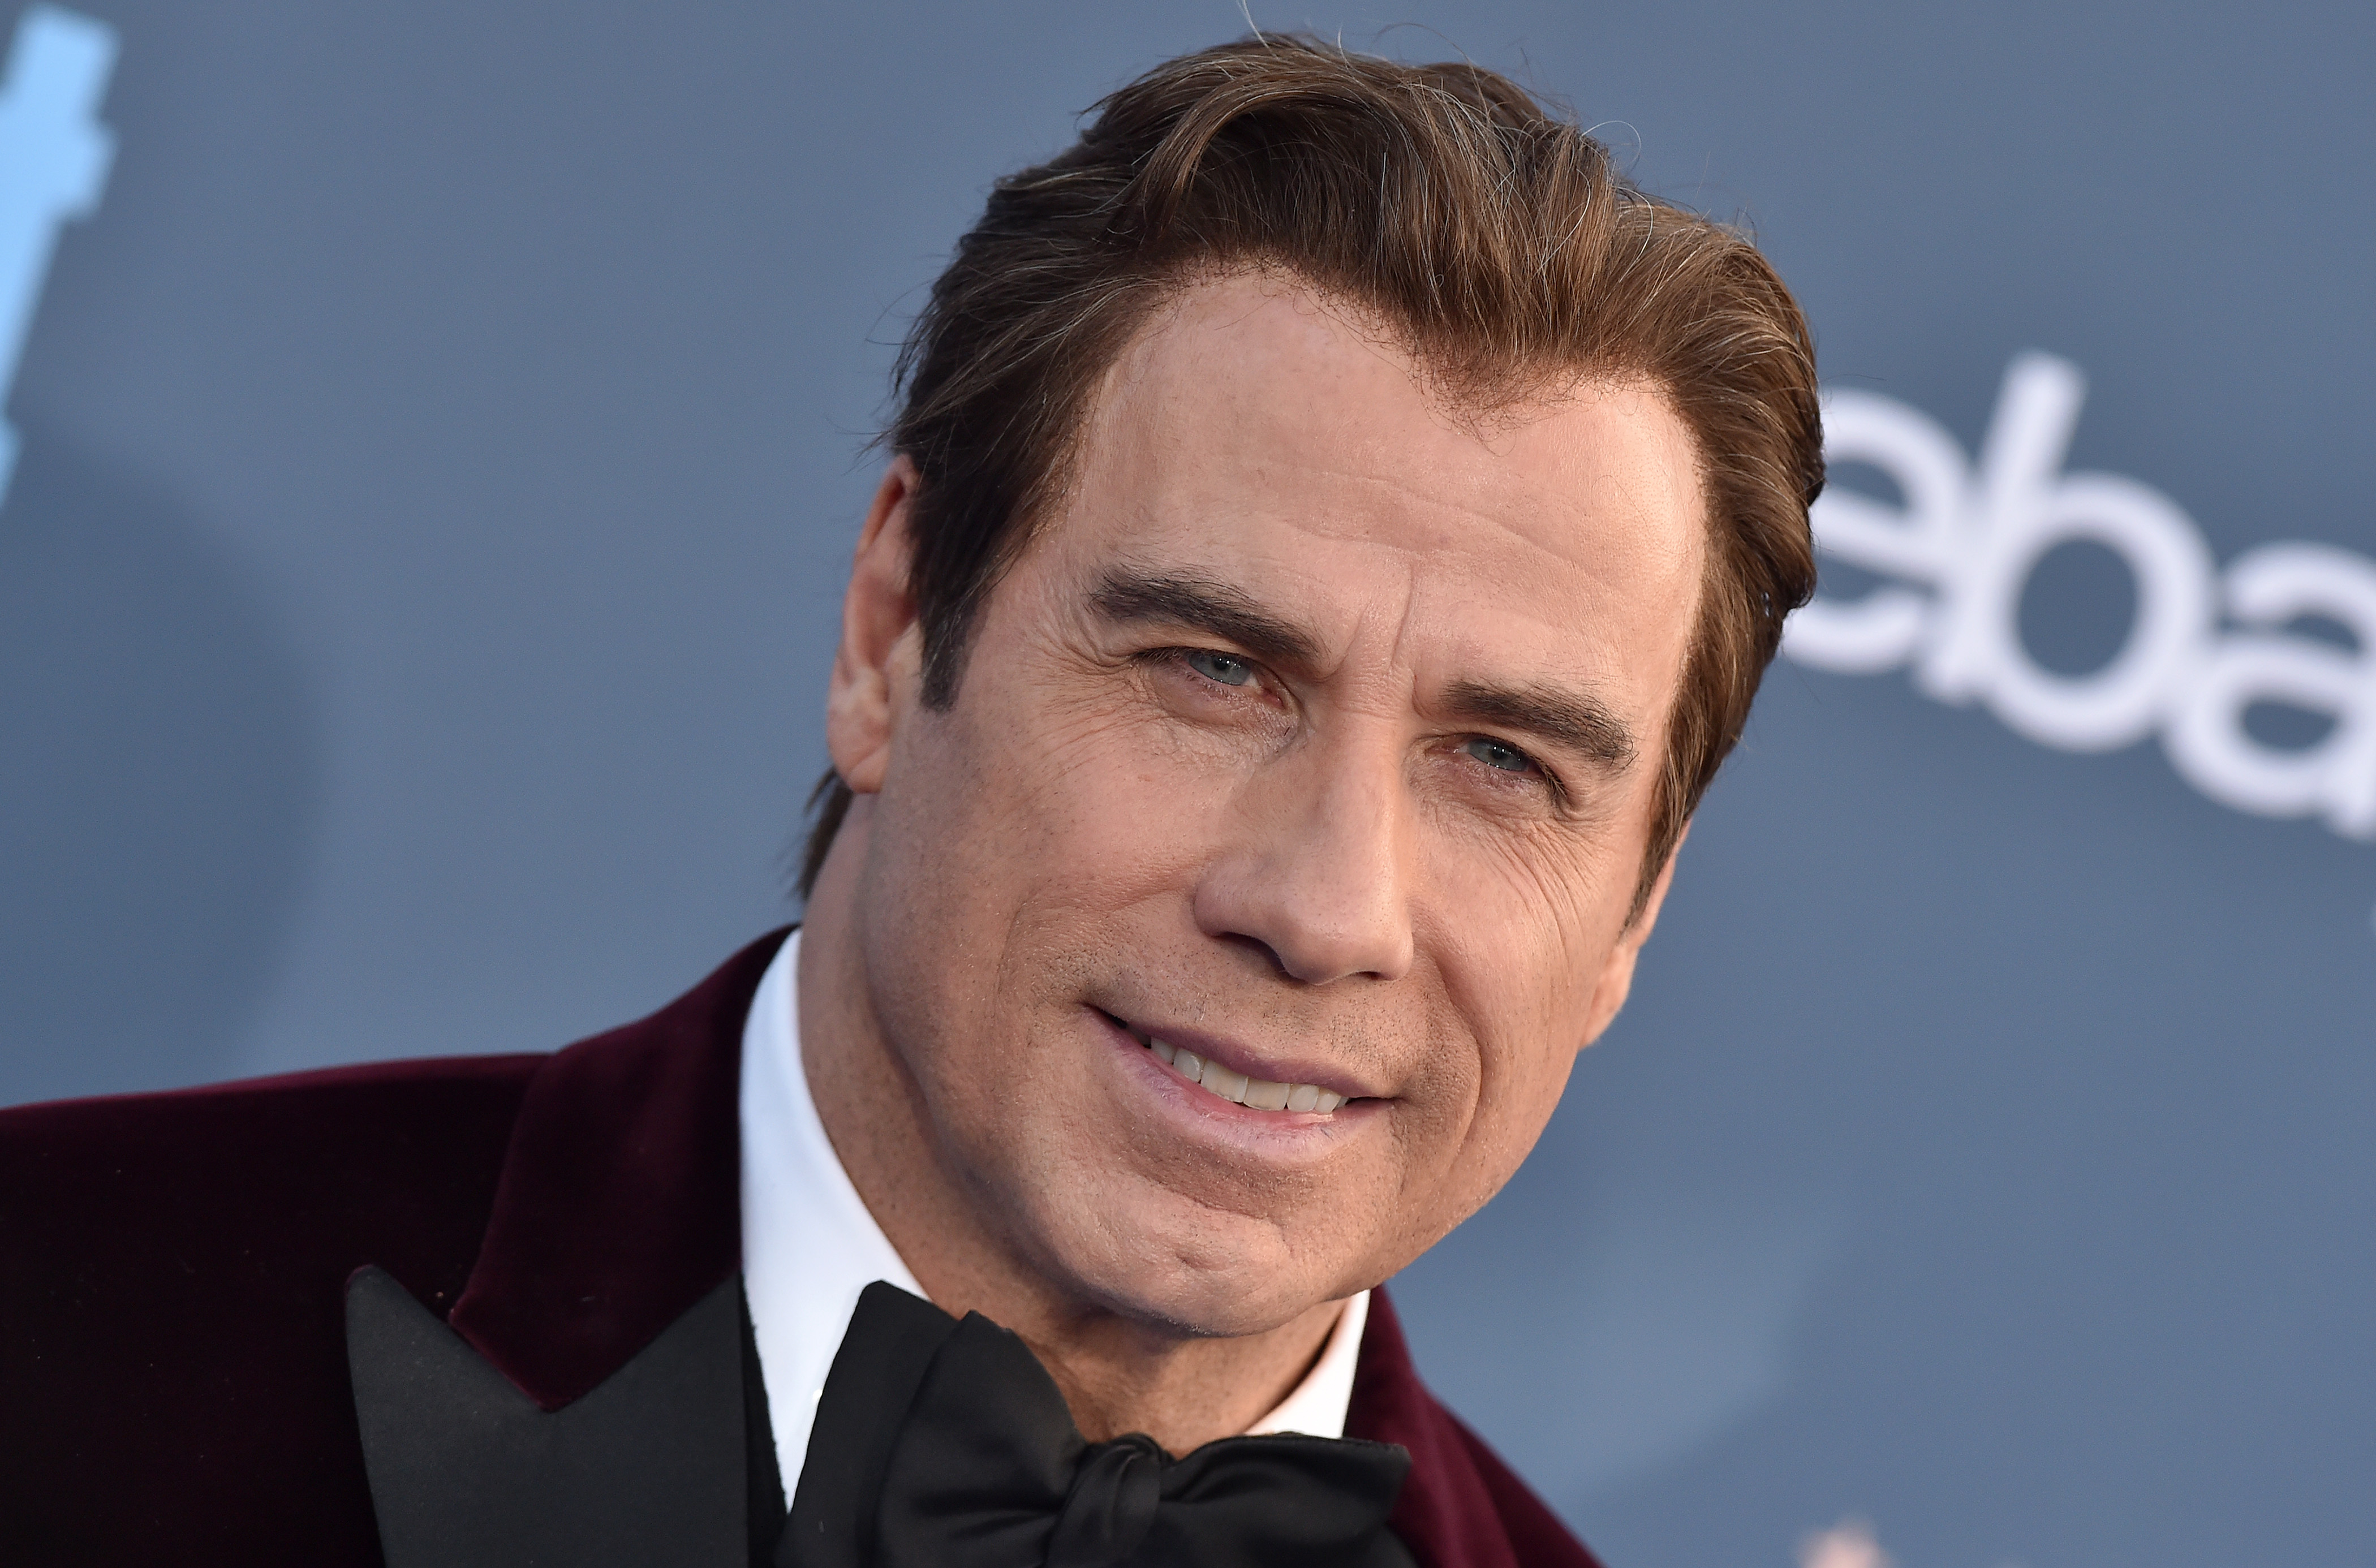 John Travolta at The 22nd Annual Critics' Choice Awards on December 11, 2016, in Santa Monica, California. | Source: Getty Images